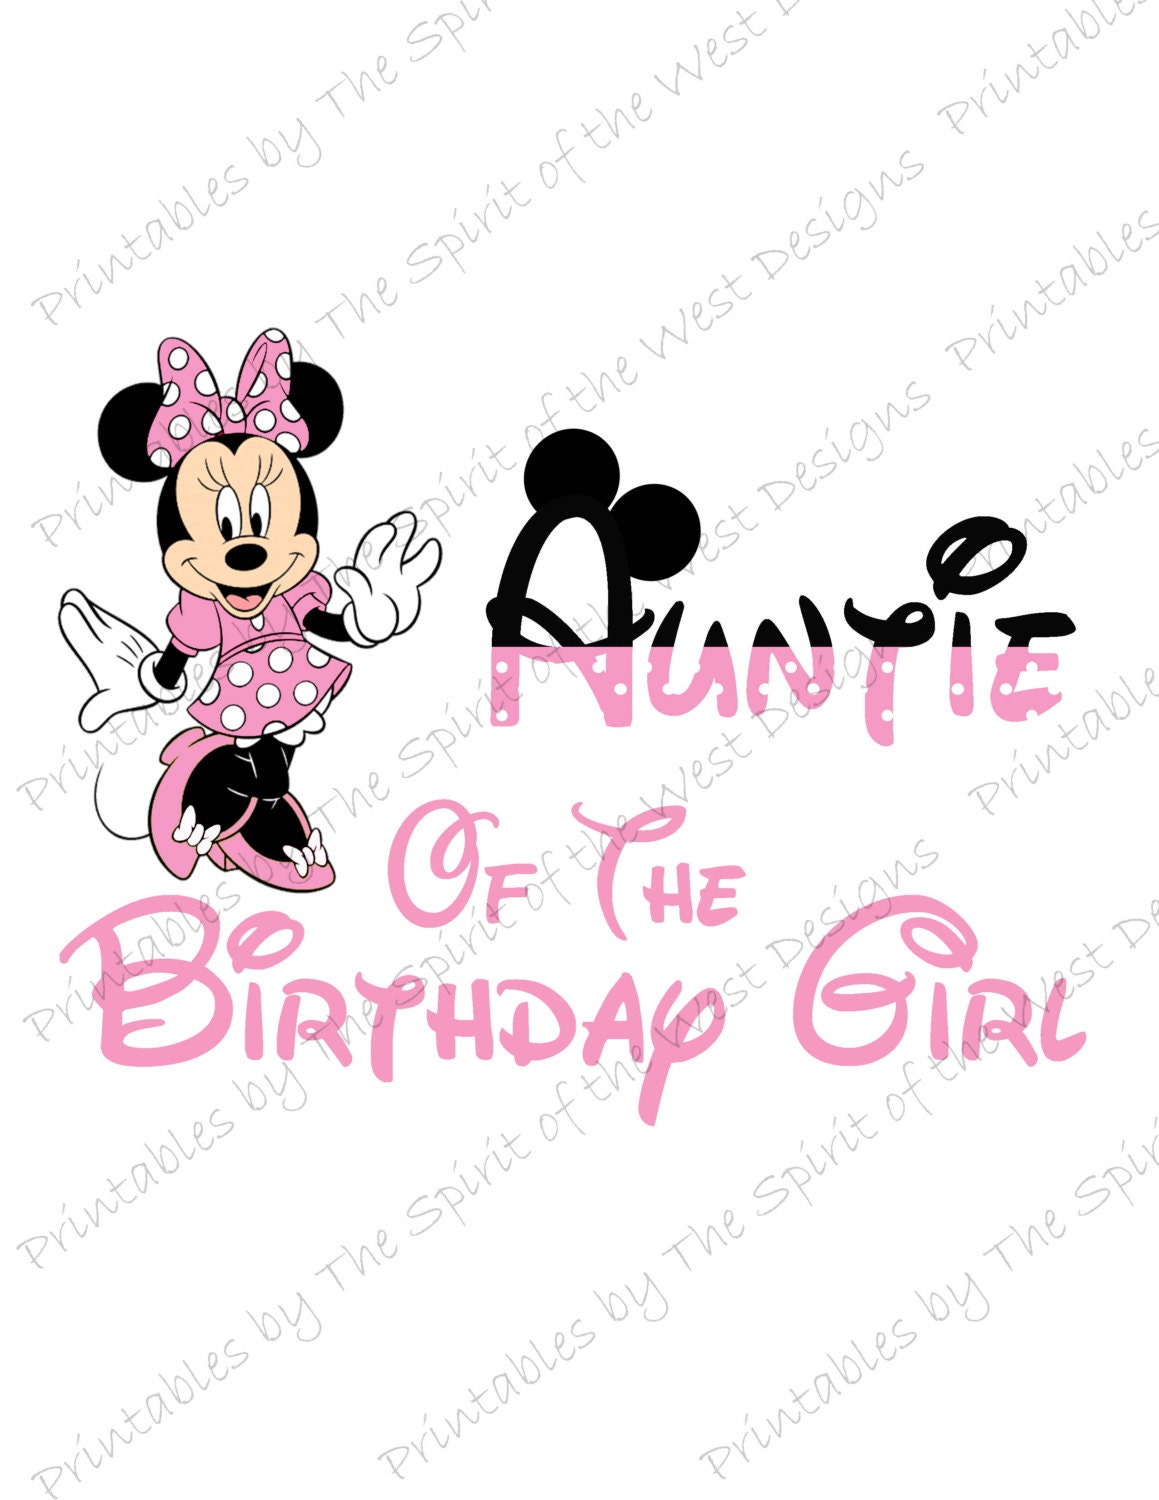 Aunt of the Birthday Girl Sadness Inside out Iron on IMAGE Printable Clip  Art Shirt Party Matching T-shirts Instant Download